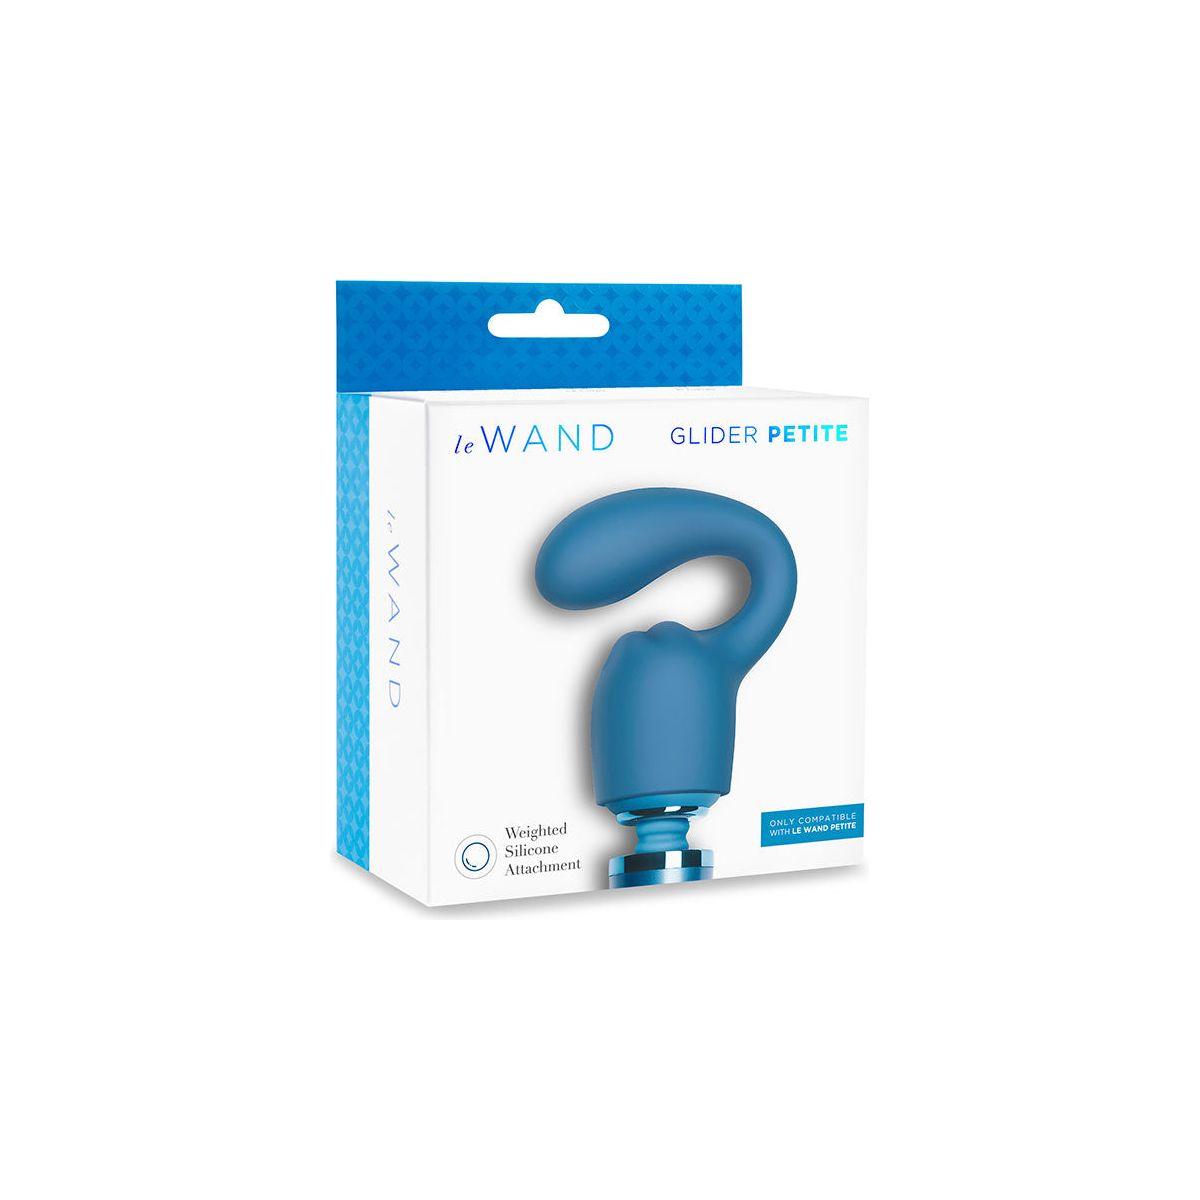 Le Wand Petite Glider Weighted Silicone Attachment - shop enby